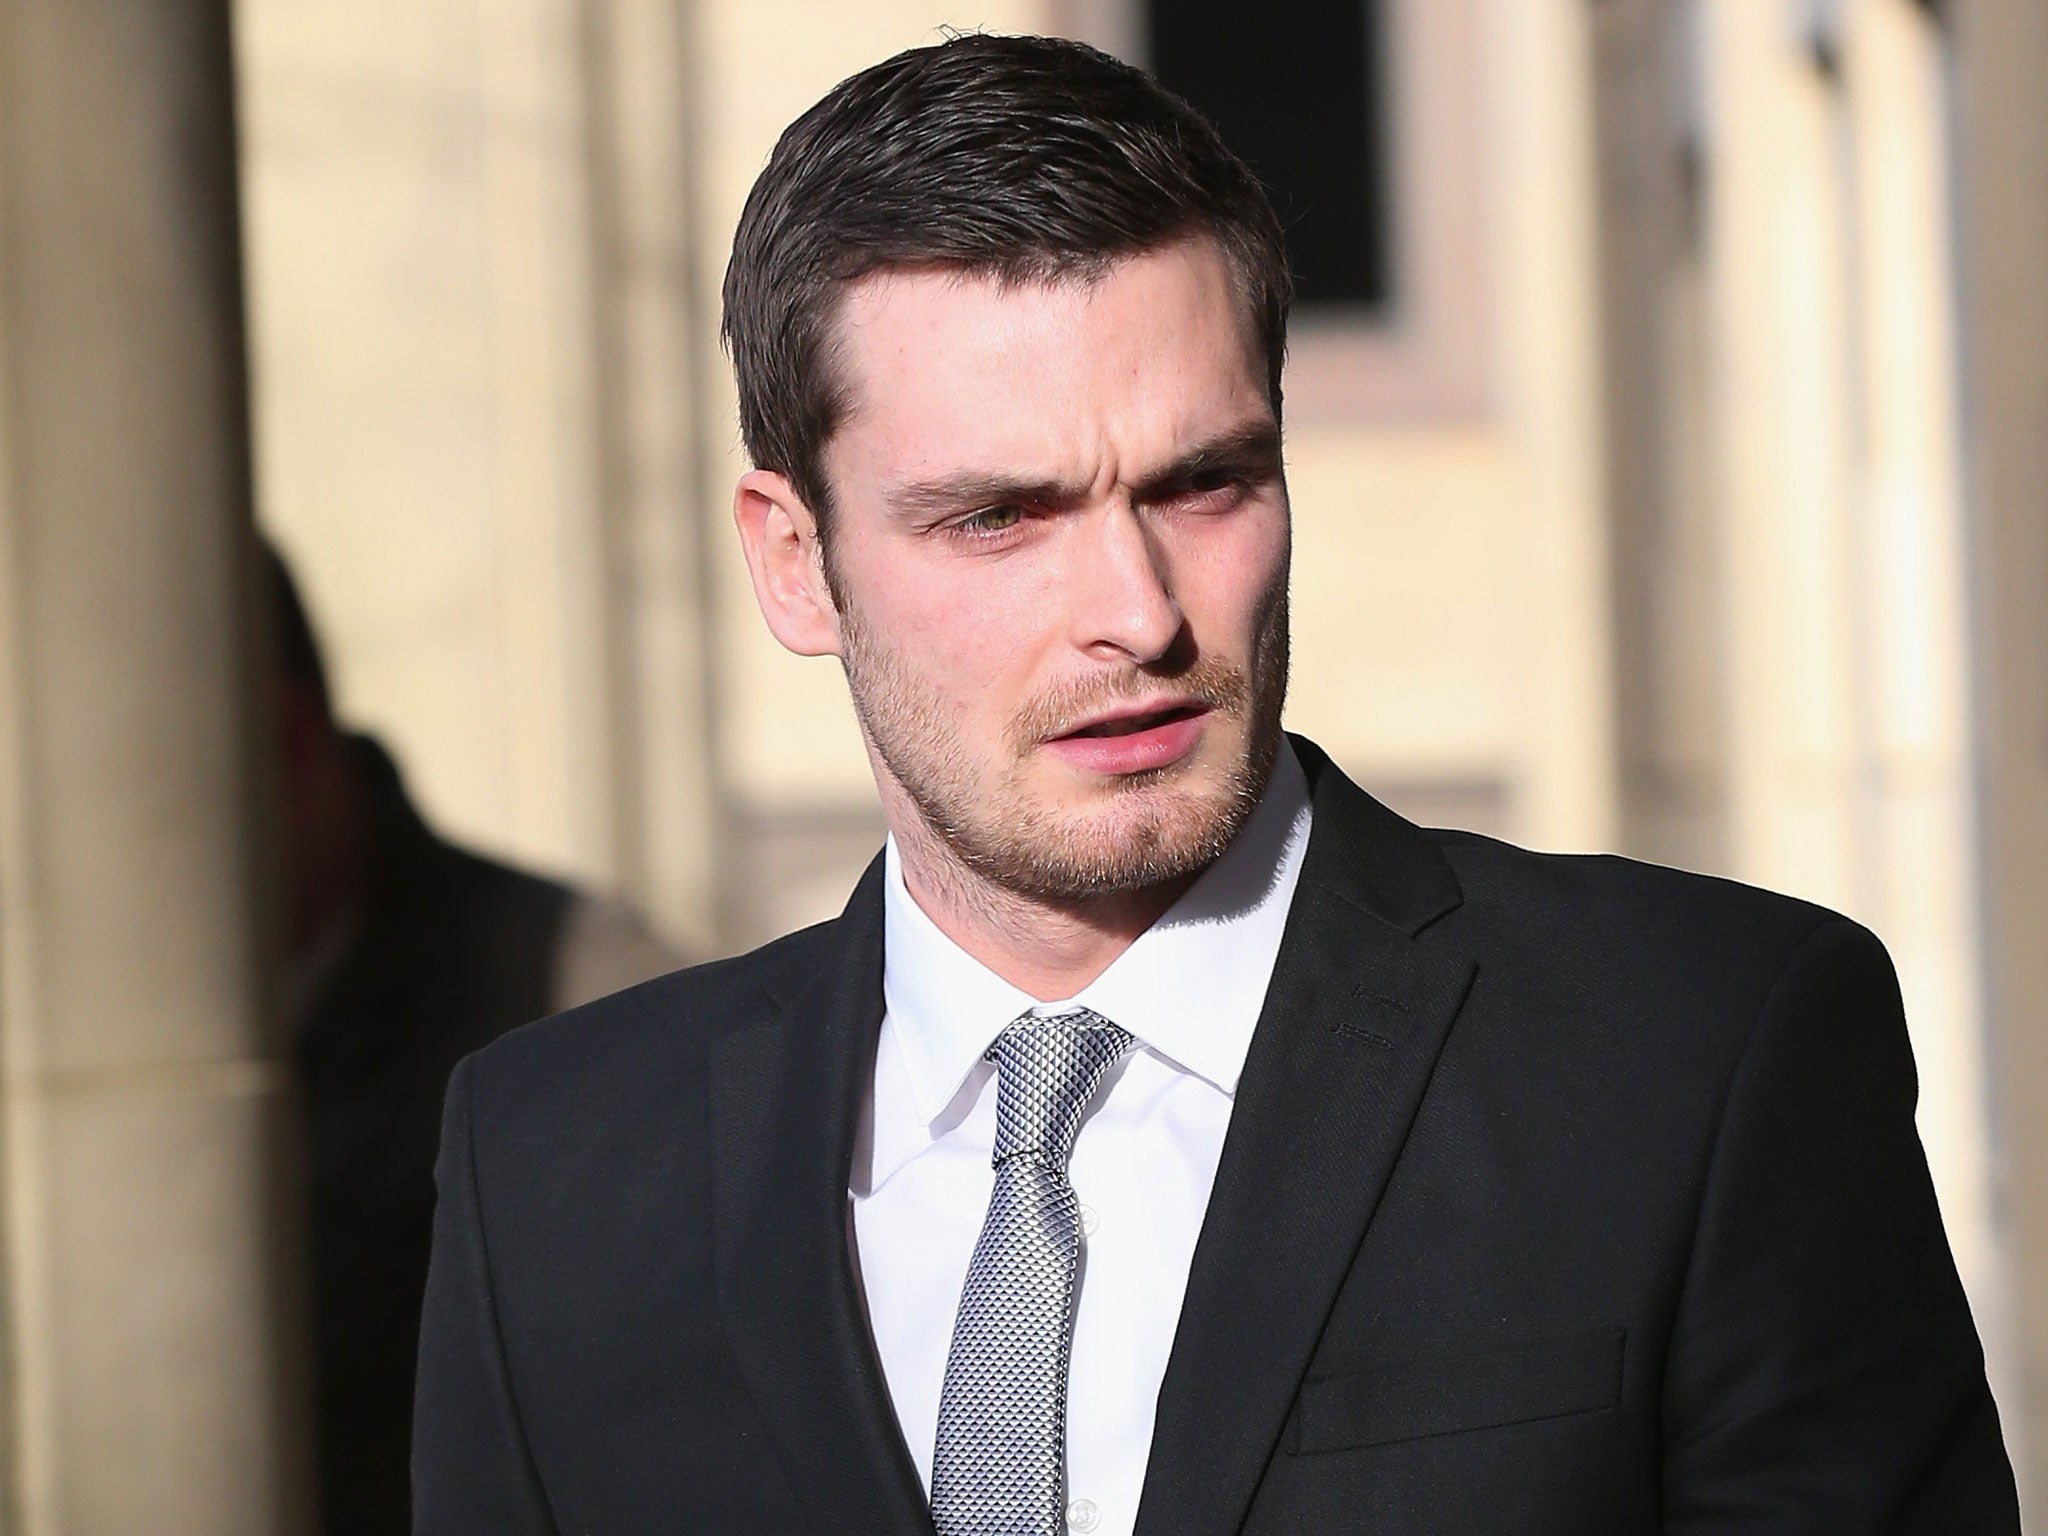 Adam Johnson admits engaging in sexual activity with the girl, but denies two more serious charges